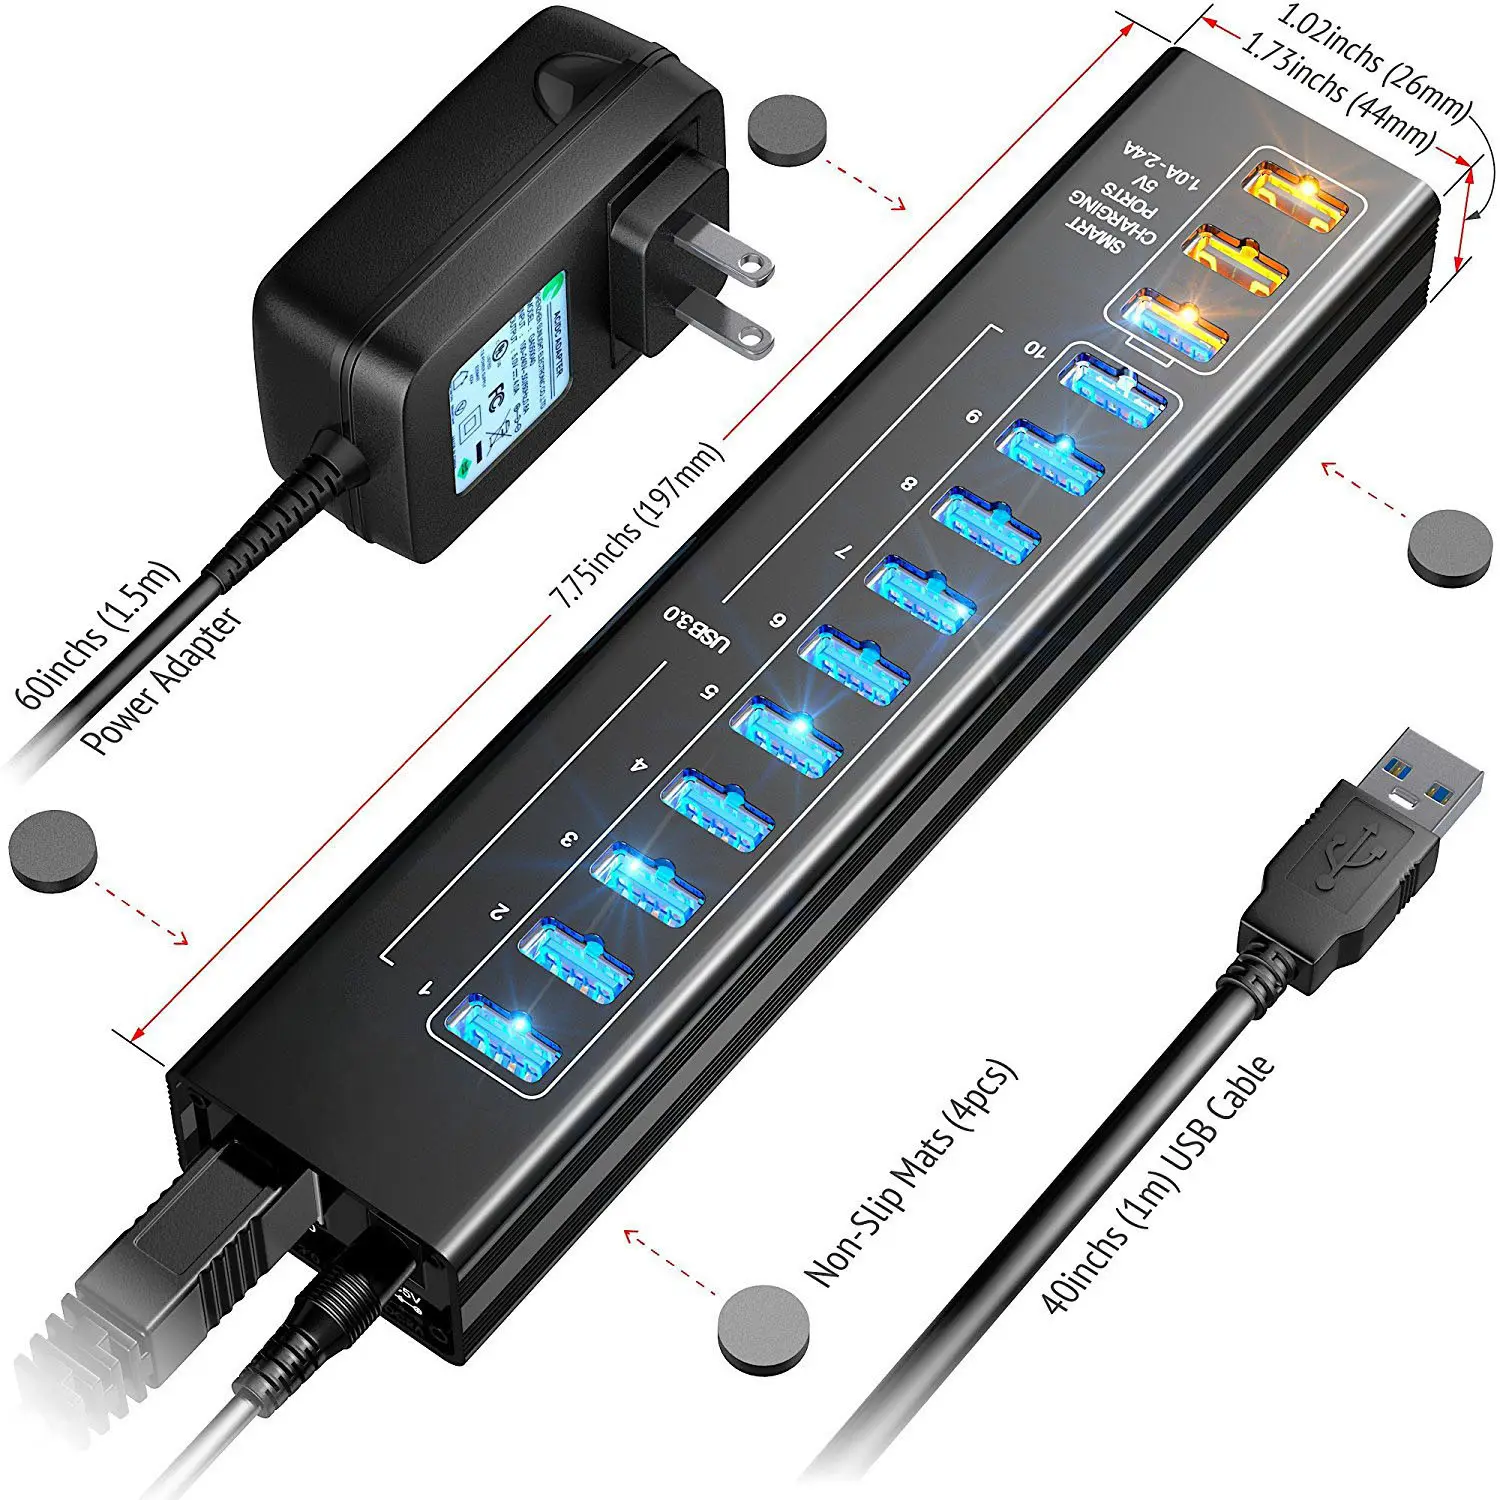 13-Port USB 3.0 Hub with 10 USB 3.0 Ports and 3 Smart Charging Ports with 5V 4A Power Adapter